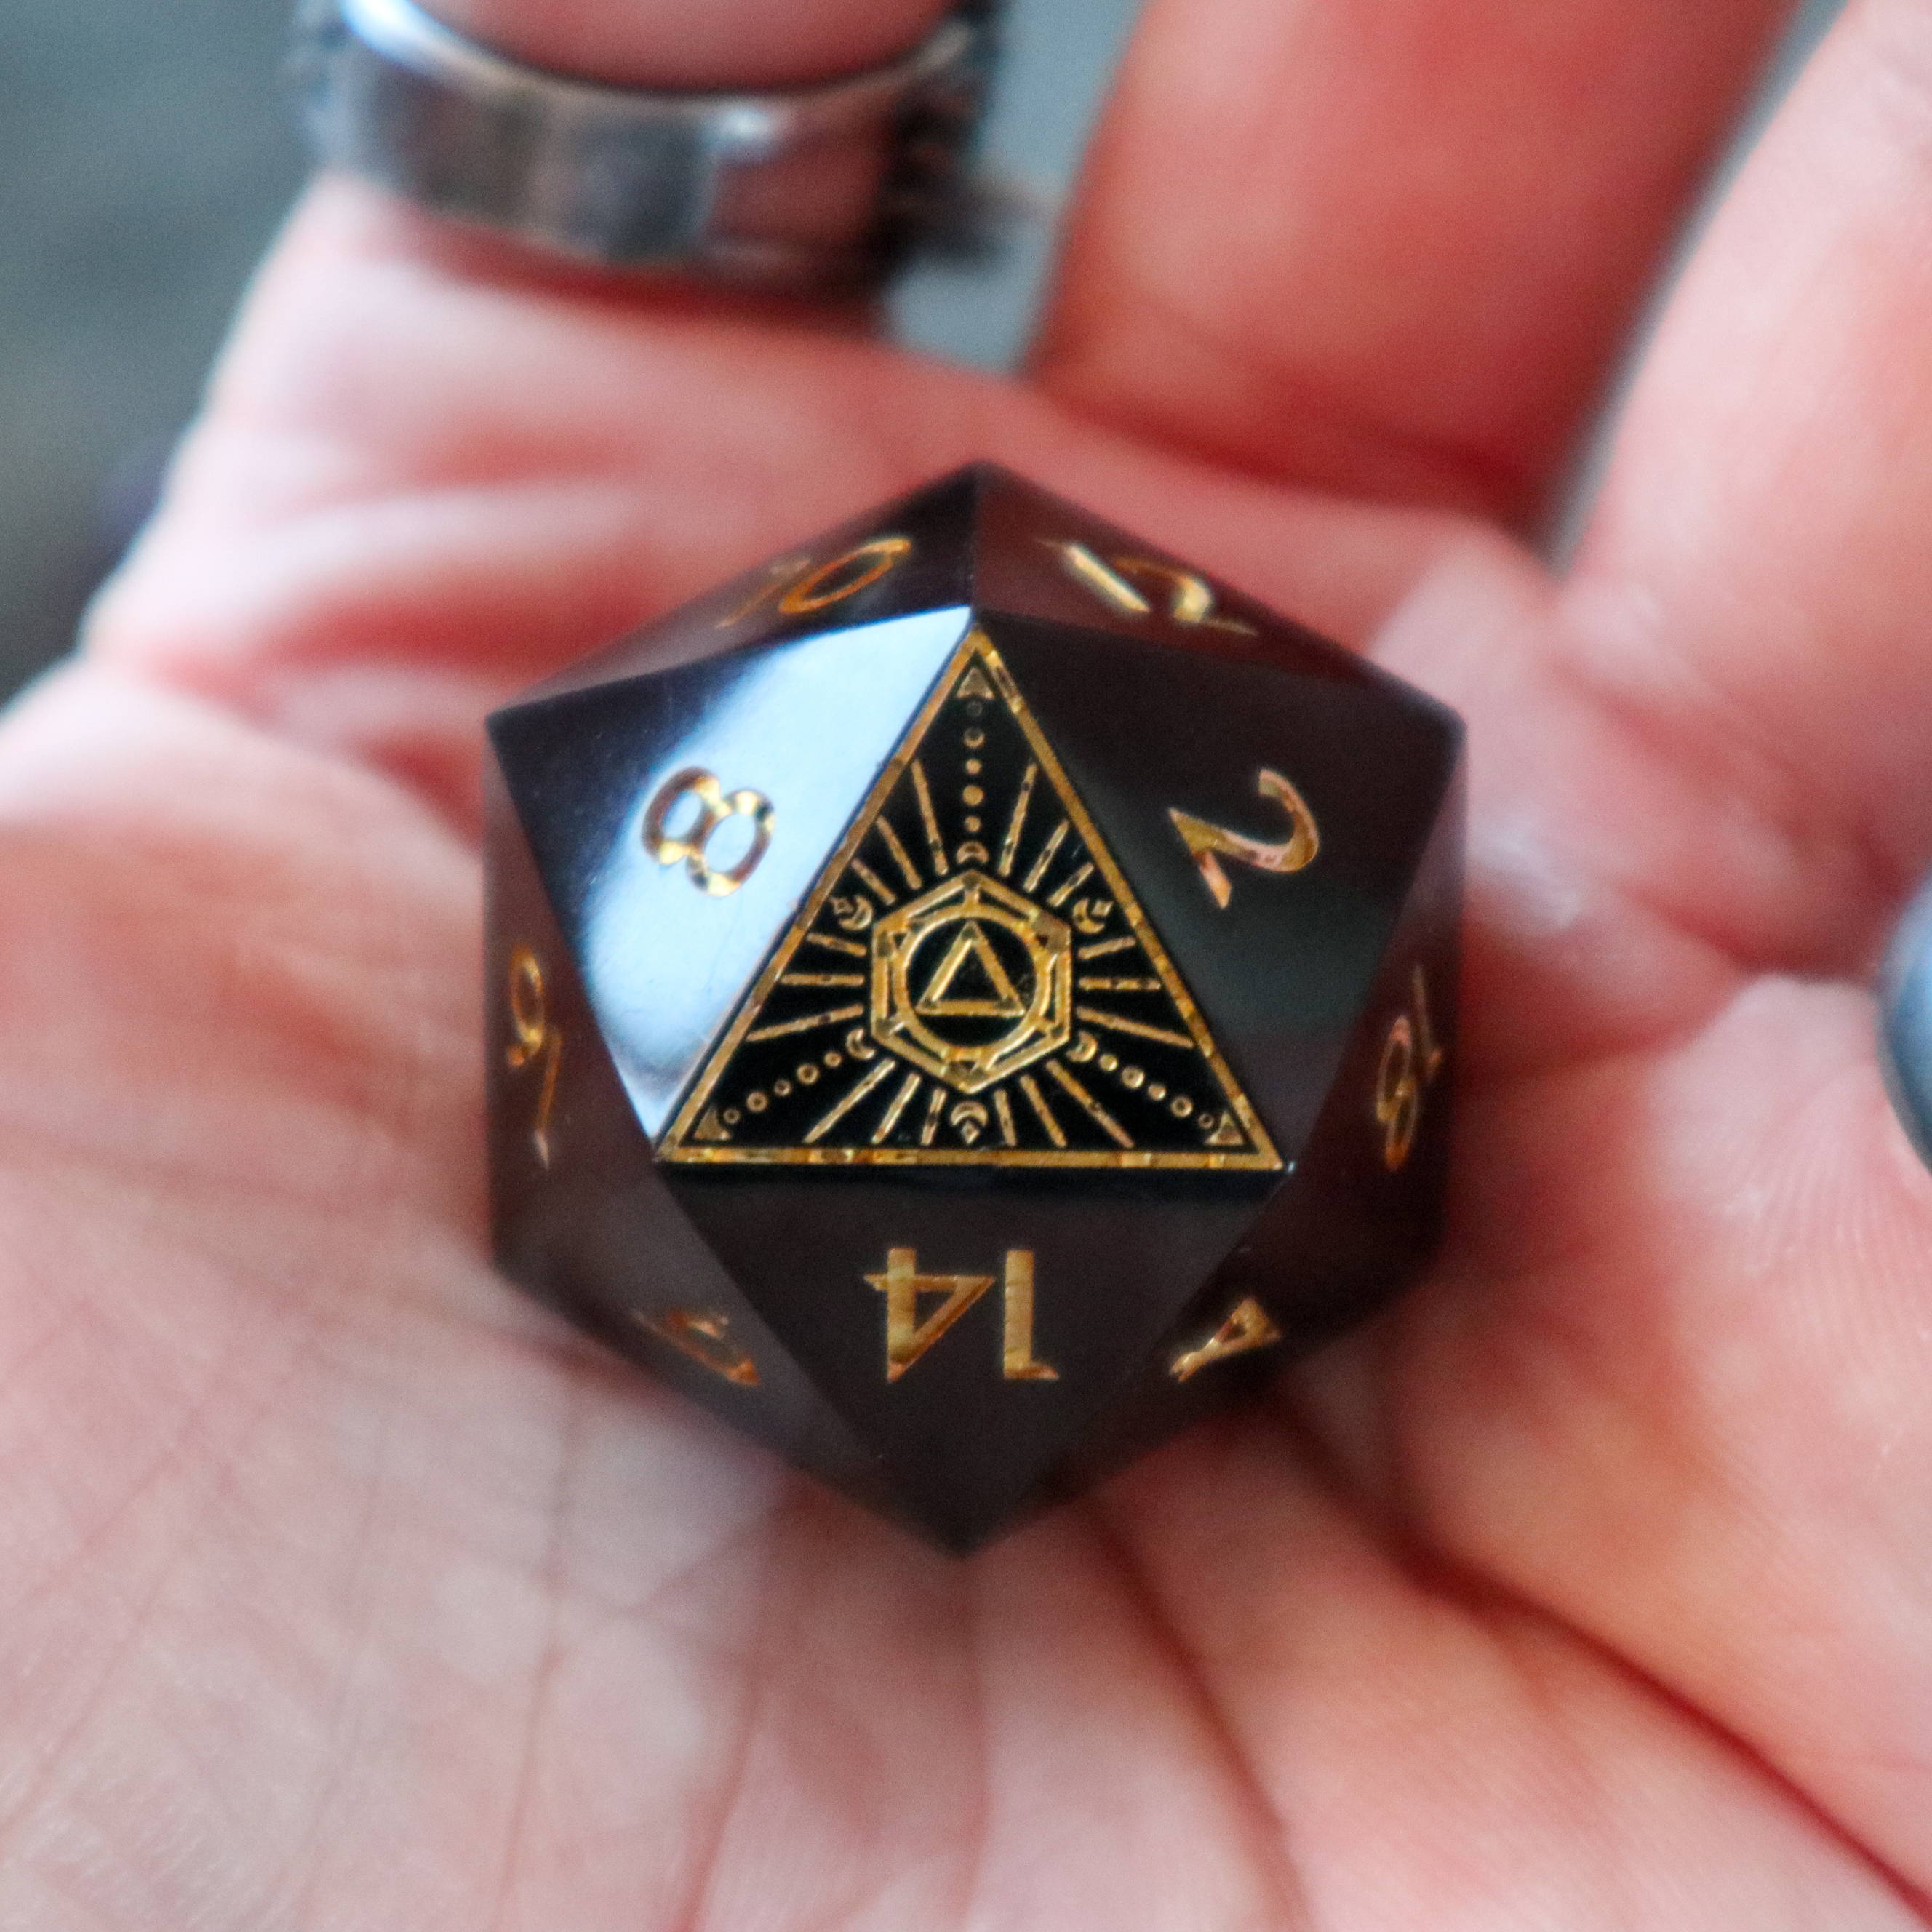 Voidheart Ascendice Close Up Photo in hand